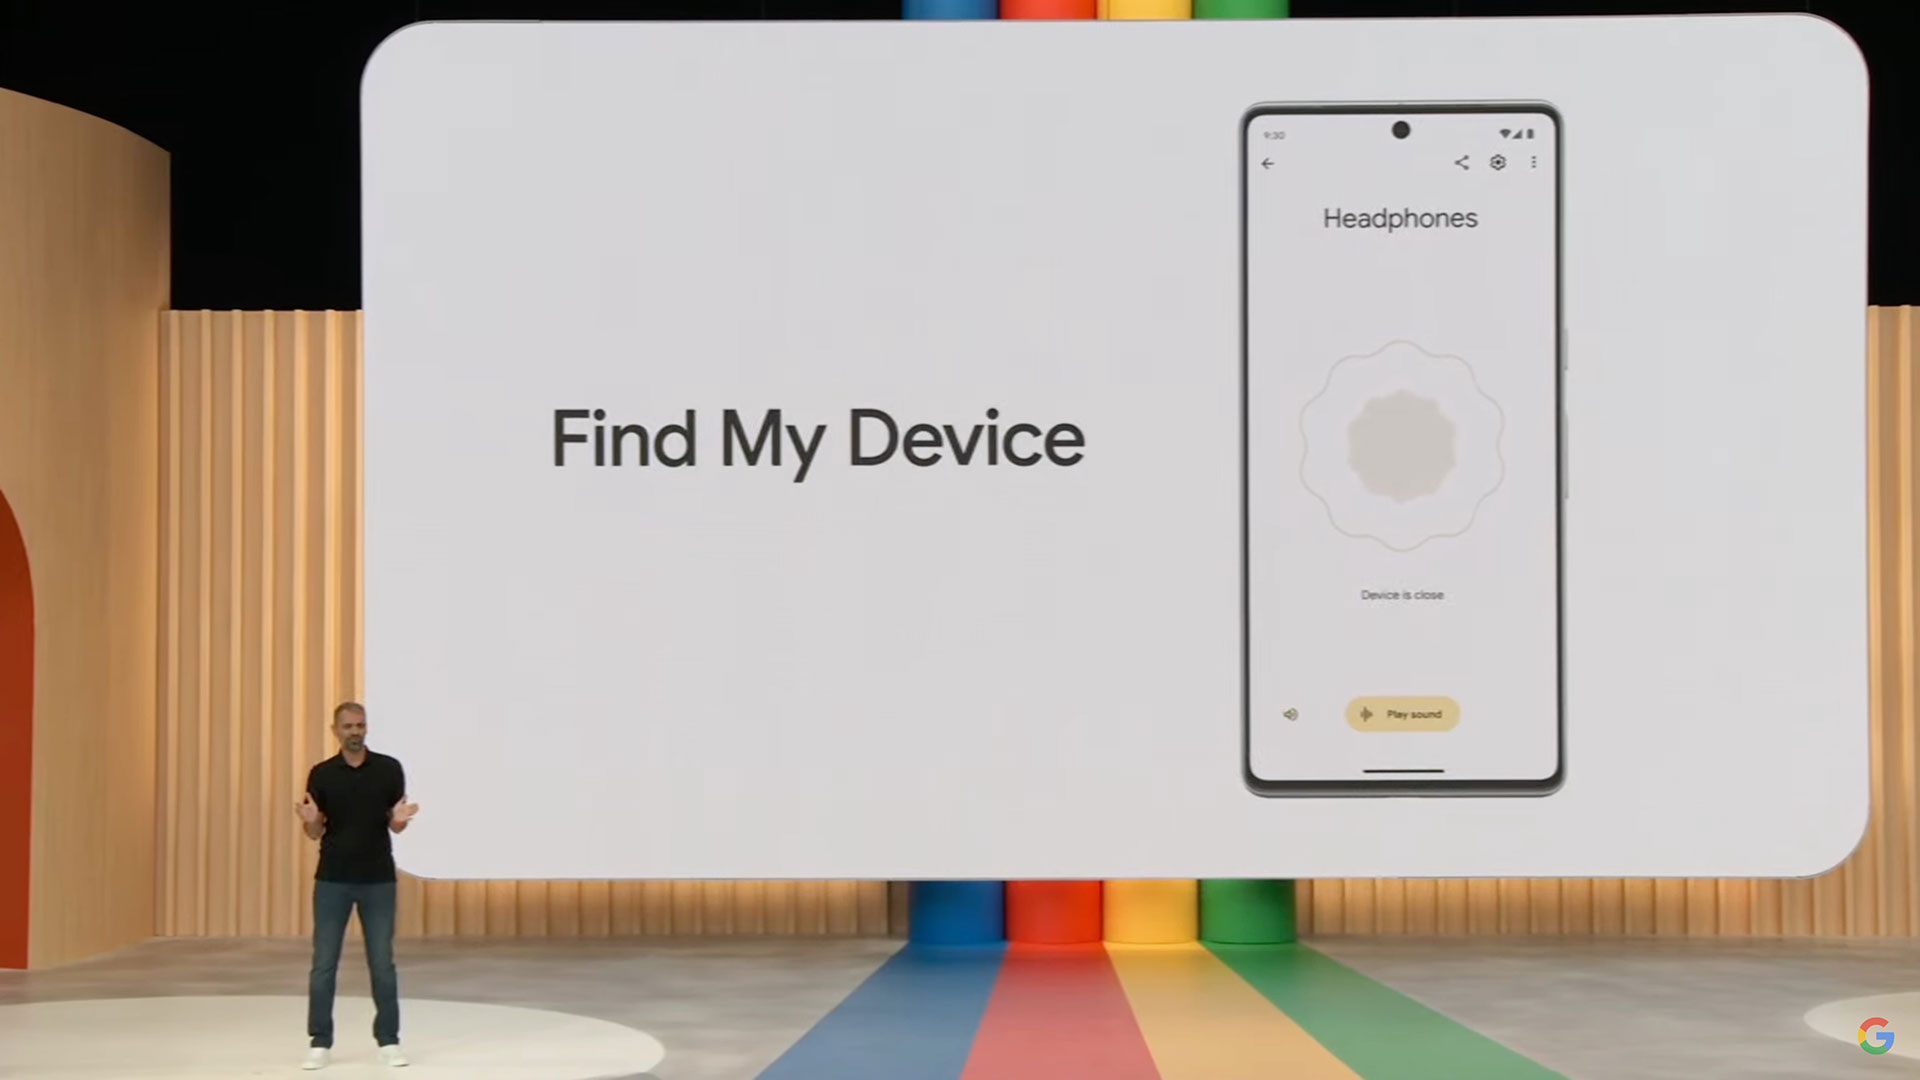 Here's everything Google has announced at I/O keynote 7